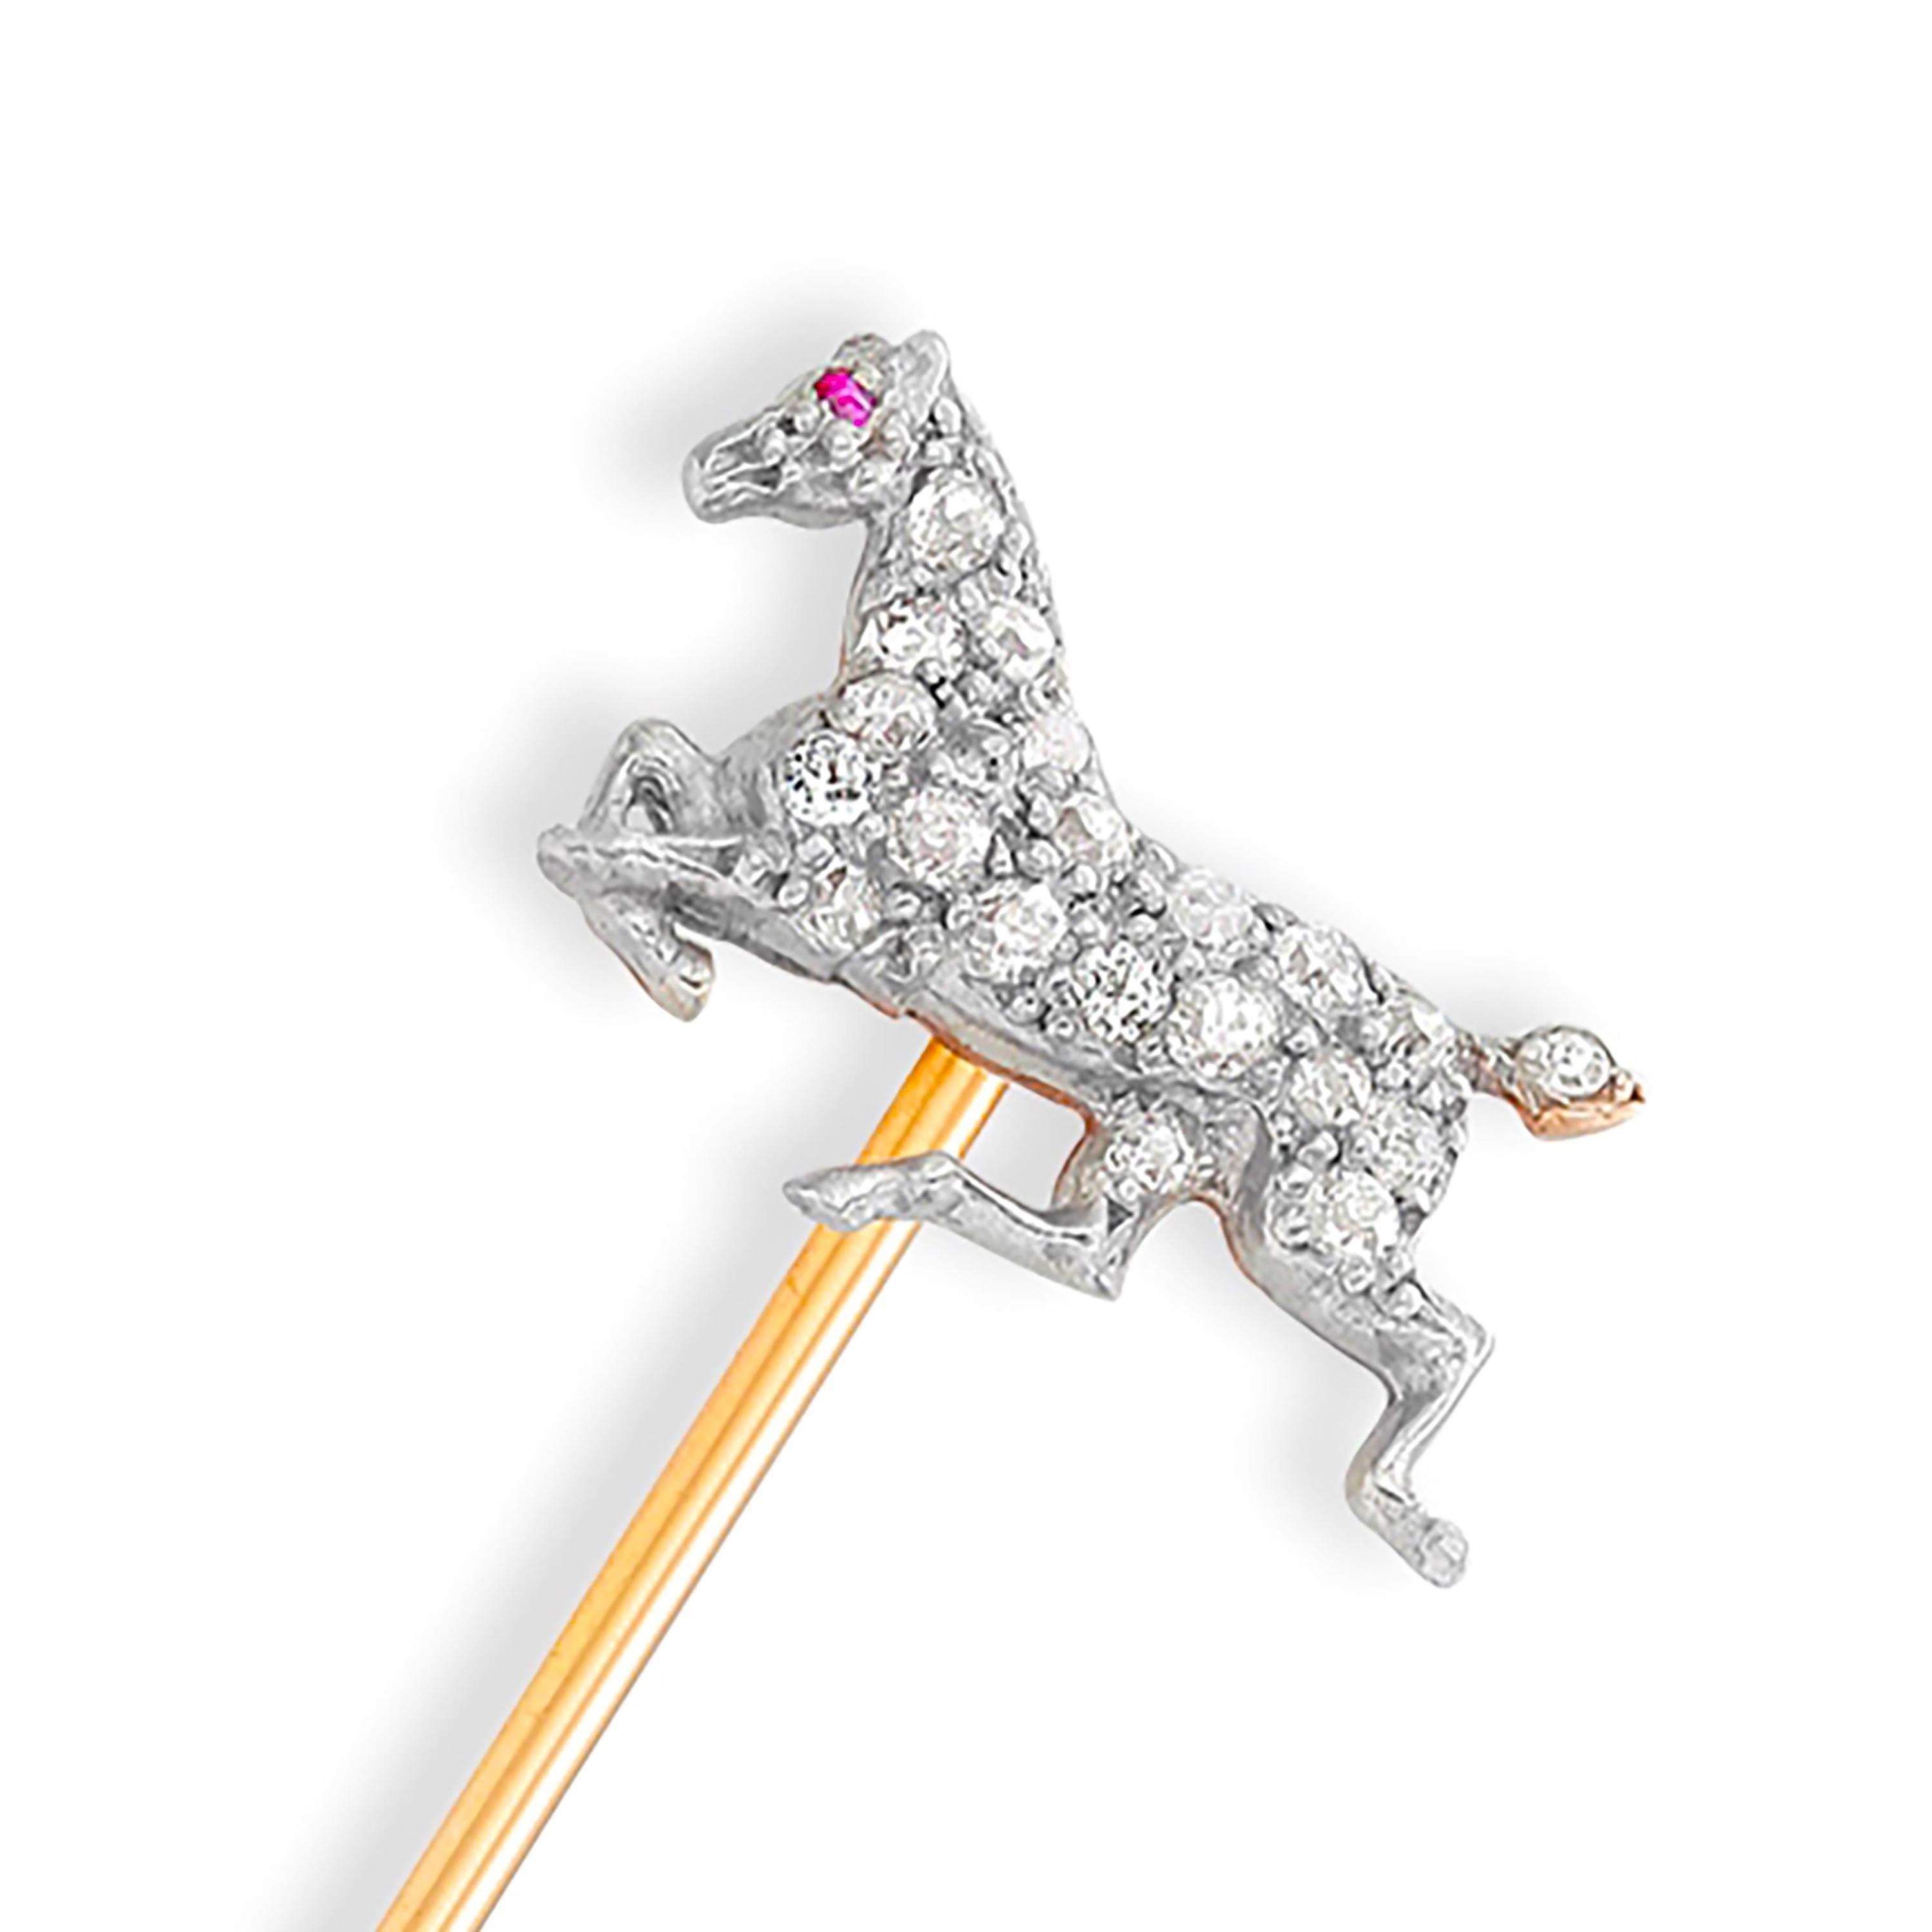 Vintage 18 karat yellow and white gold diamond and ruby horse stick pin
The body of the horse pave set with diamonds and a ruby as eye accent
Diamonds weighing approximately 0.45 carats
Horse measuring 0.65 inch x 045 inch
Accompanied by  E. Woodman